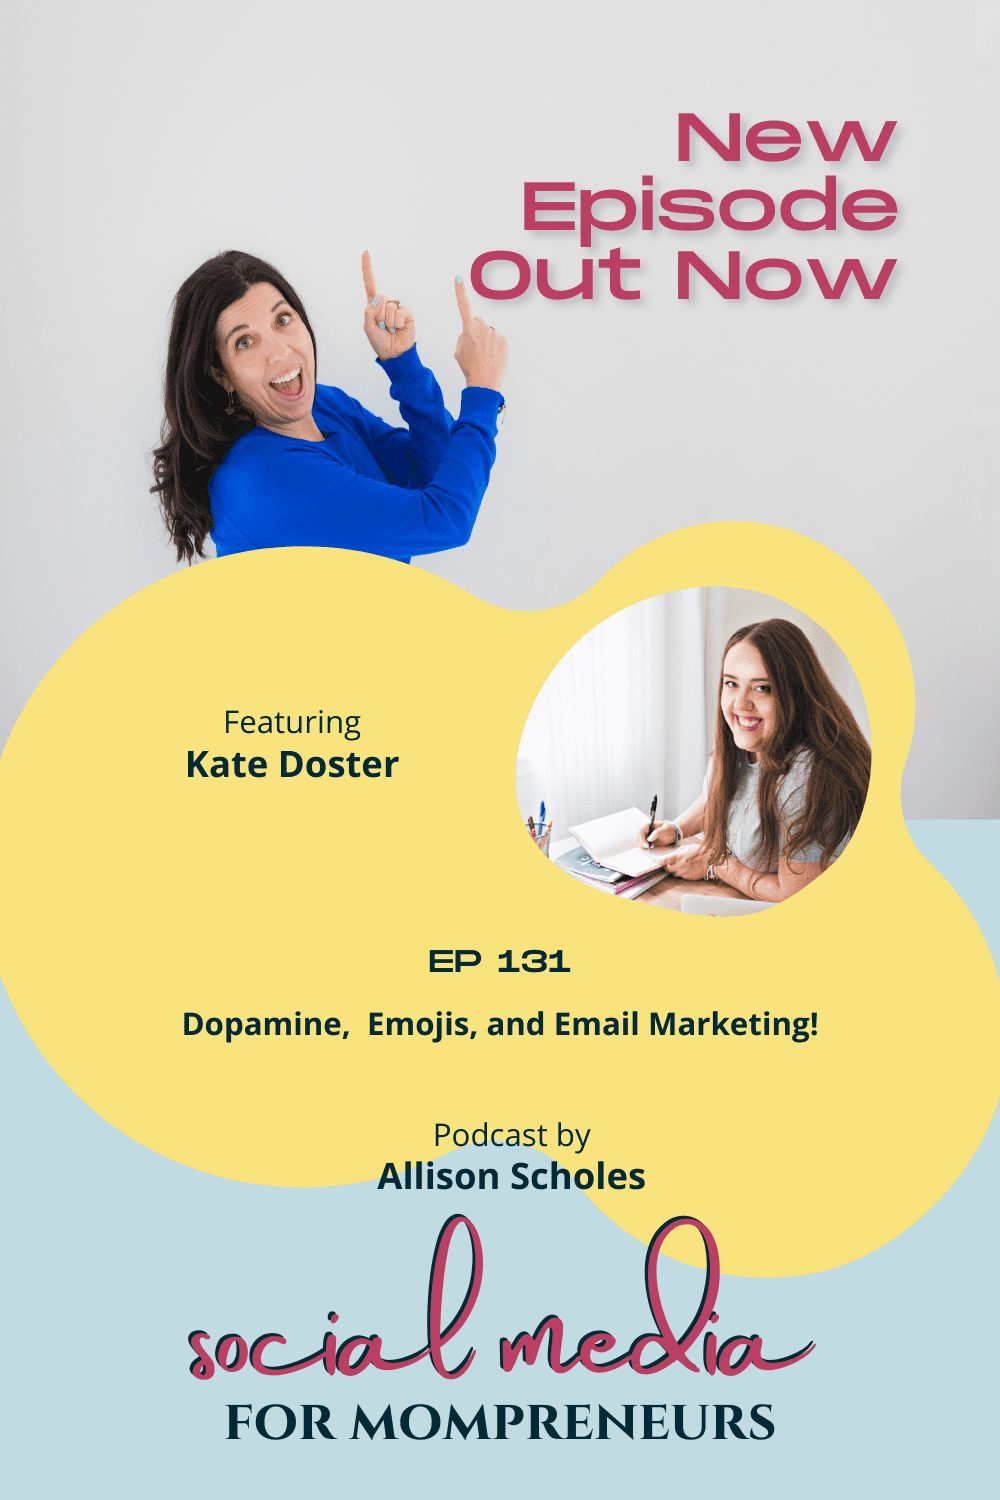 Top portion contains a photo of Allison Scholes, a white femaile with long dark brown hair that is down. She is wearing a dark blue long sleeve shirt and pointing up with both hands. near her hands are the words "New Episode Out Now" Center of the image is the words "Featuring Kate Doster" on the right and a rounded image of Kate Doster, a white female with long brown hair that is down and a grey short-sleeve tee-shirt, is sitting at a desk holding a pen in her right hand and a notebook in her left that rests on the desk. Under these are the words " EP 131 Dopamine, Emojis, and Email Marketing. Podcast by Allison Scholes". The logo for the podcast Social Media for Mompreneurs is under this. This image is found in the blog post for the episode listed on it, with the blog titled "Easily Write Effective Emails That Delight Your People Every Week"